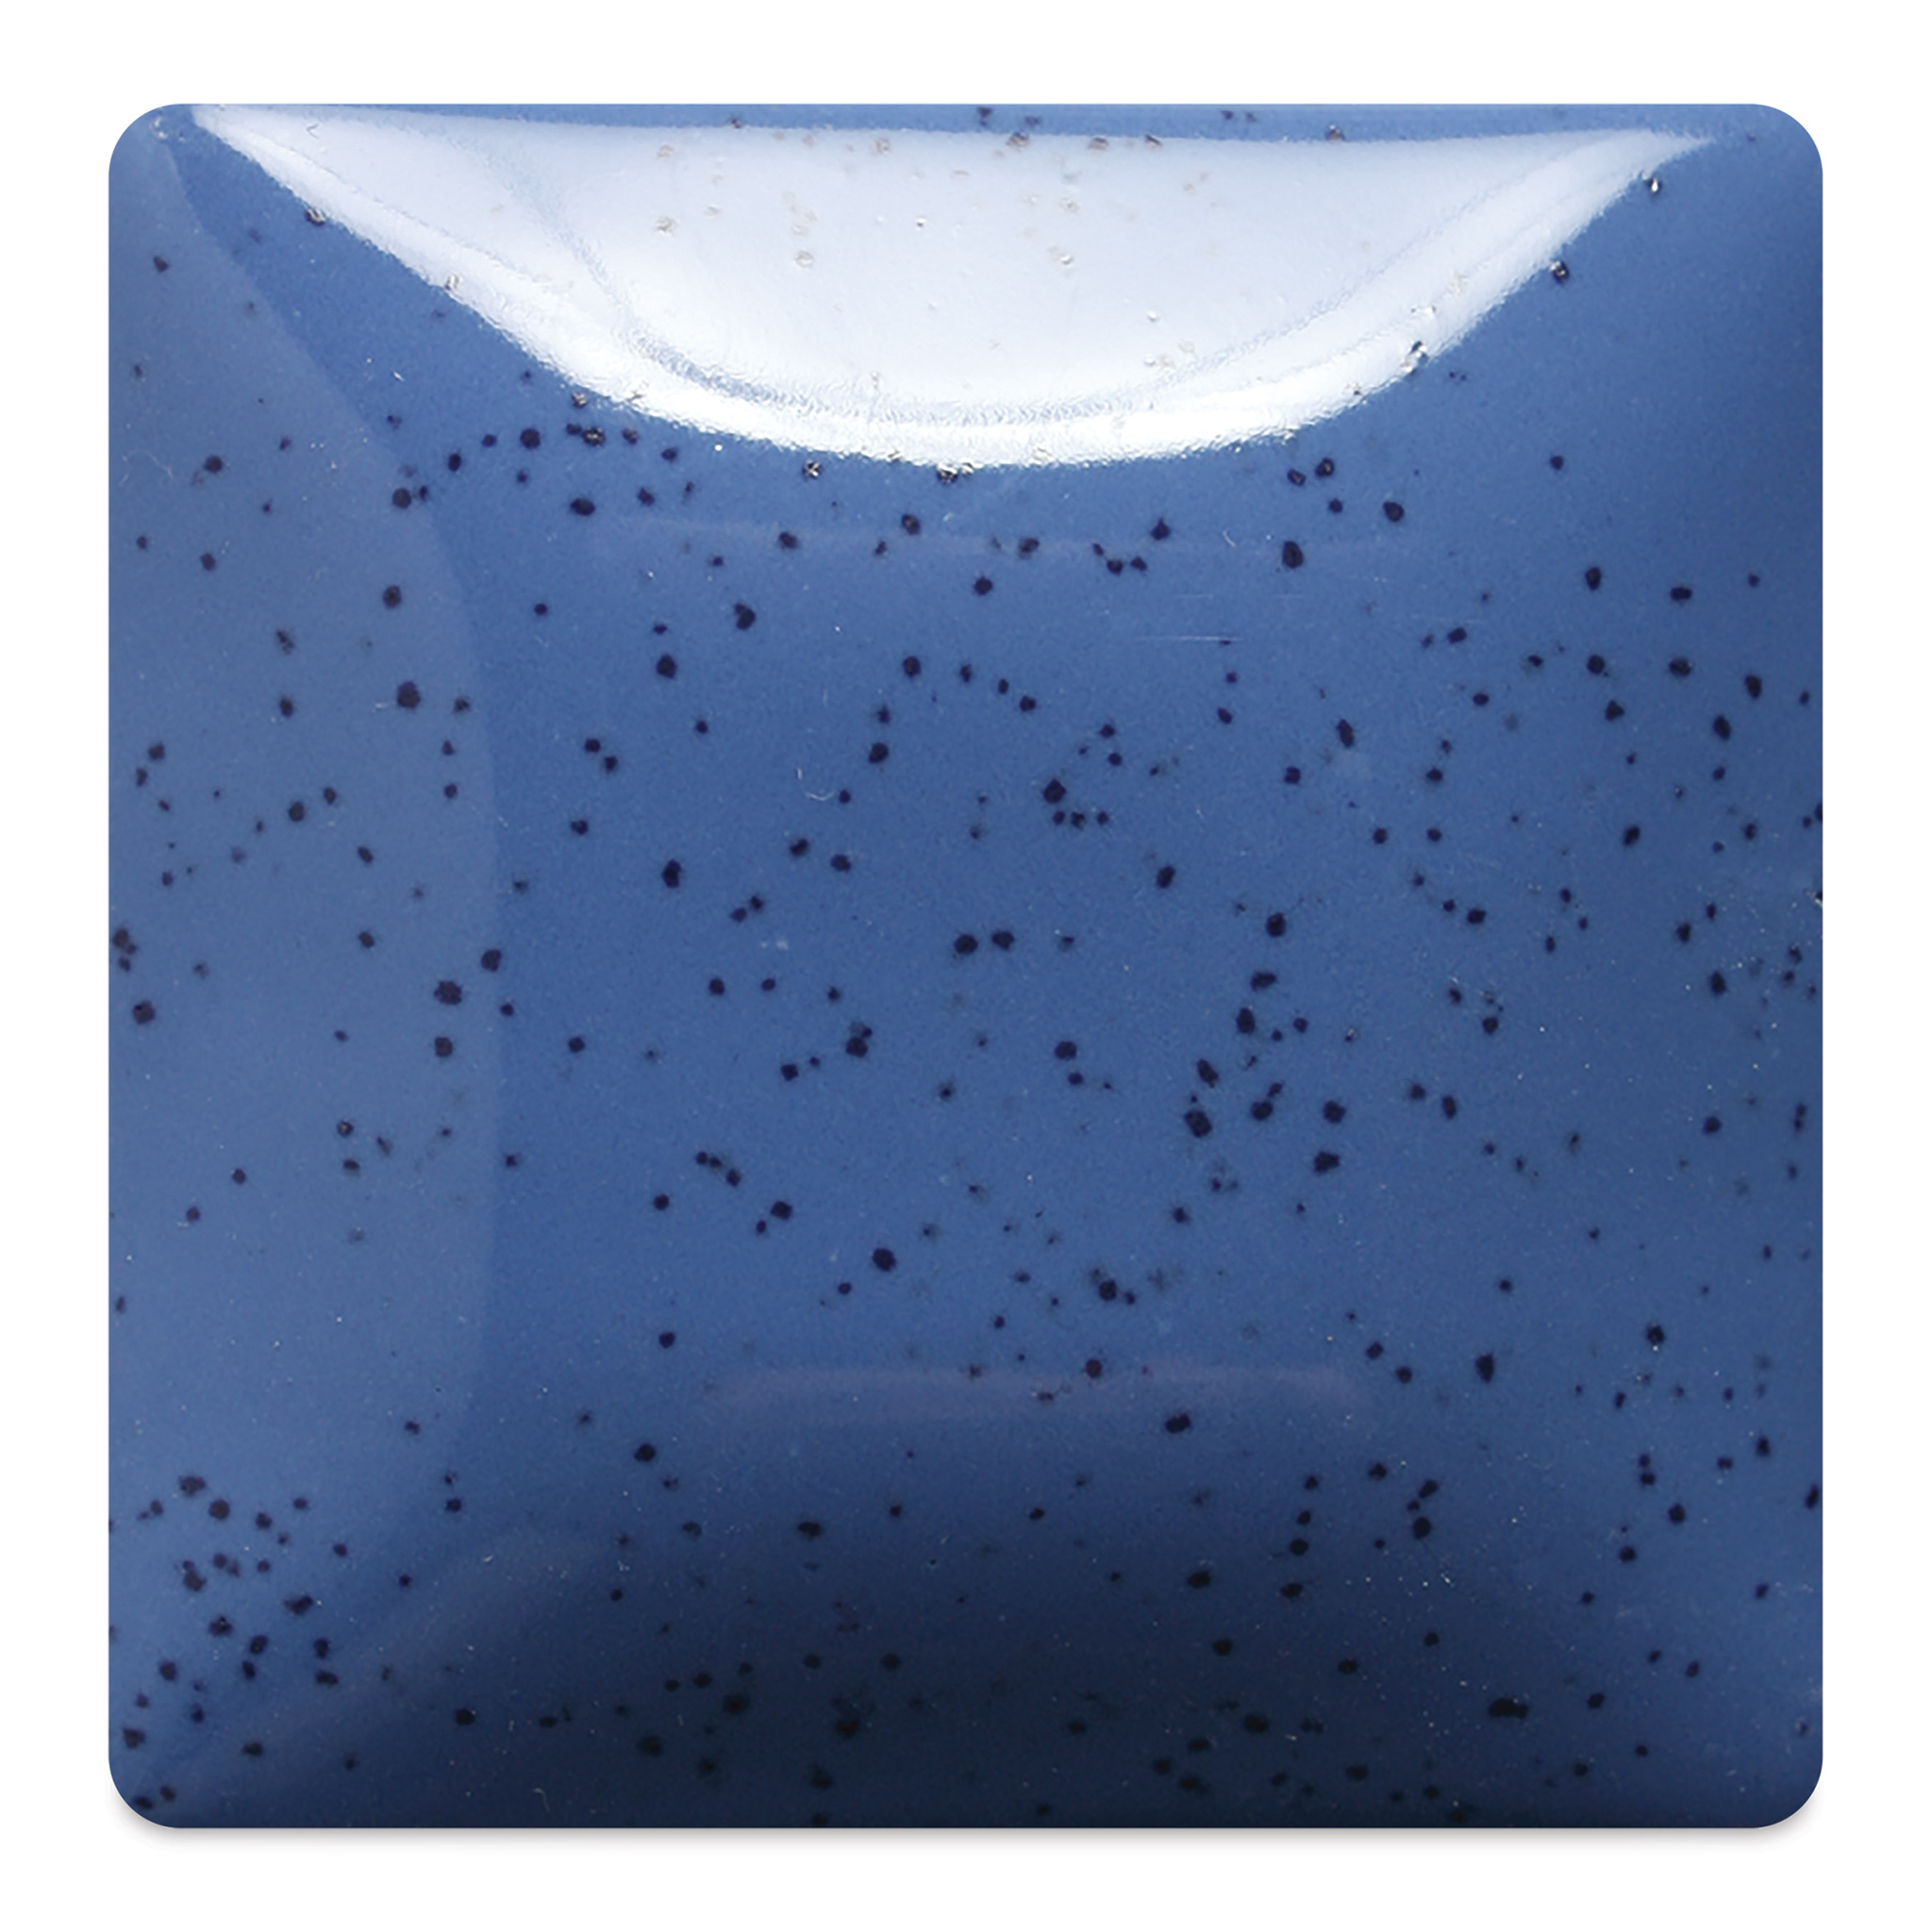 Mayco Speckled Stroke & Coat Glaze - Speckled Cotton Tail, Pint